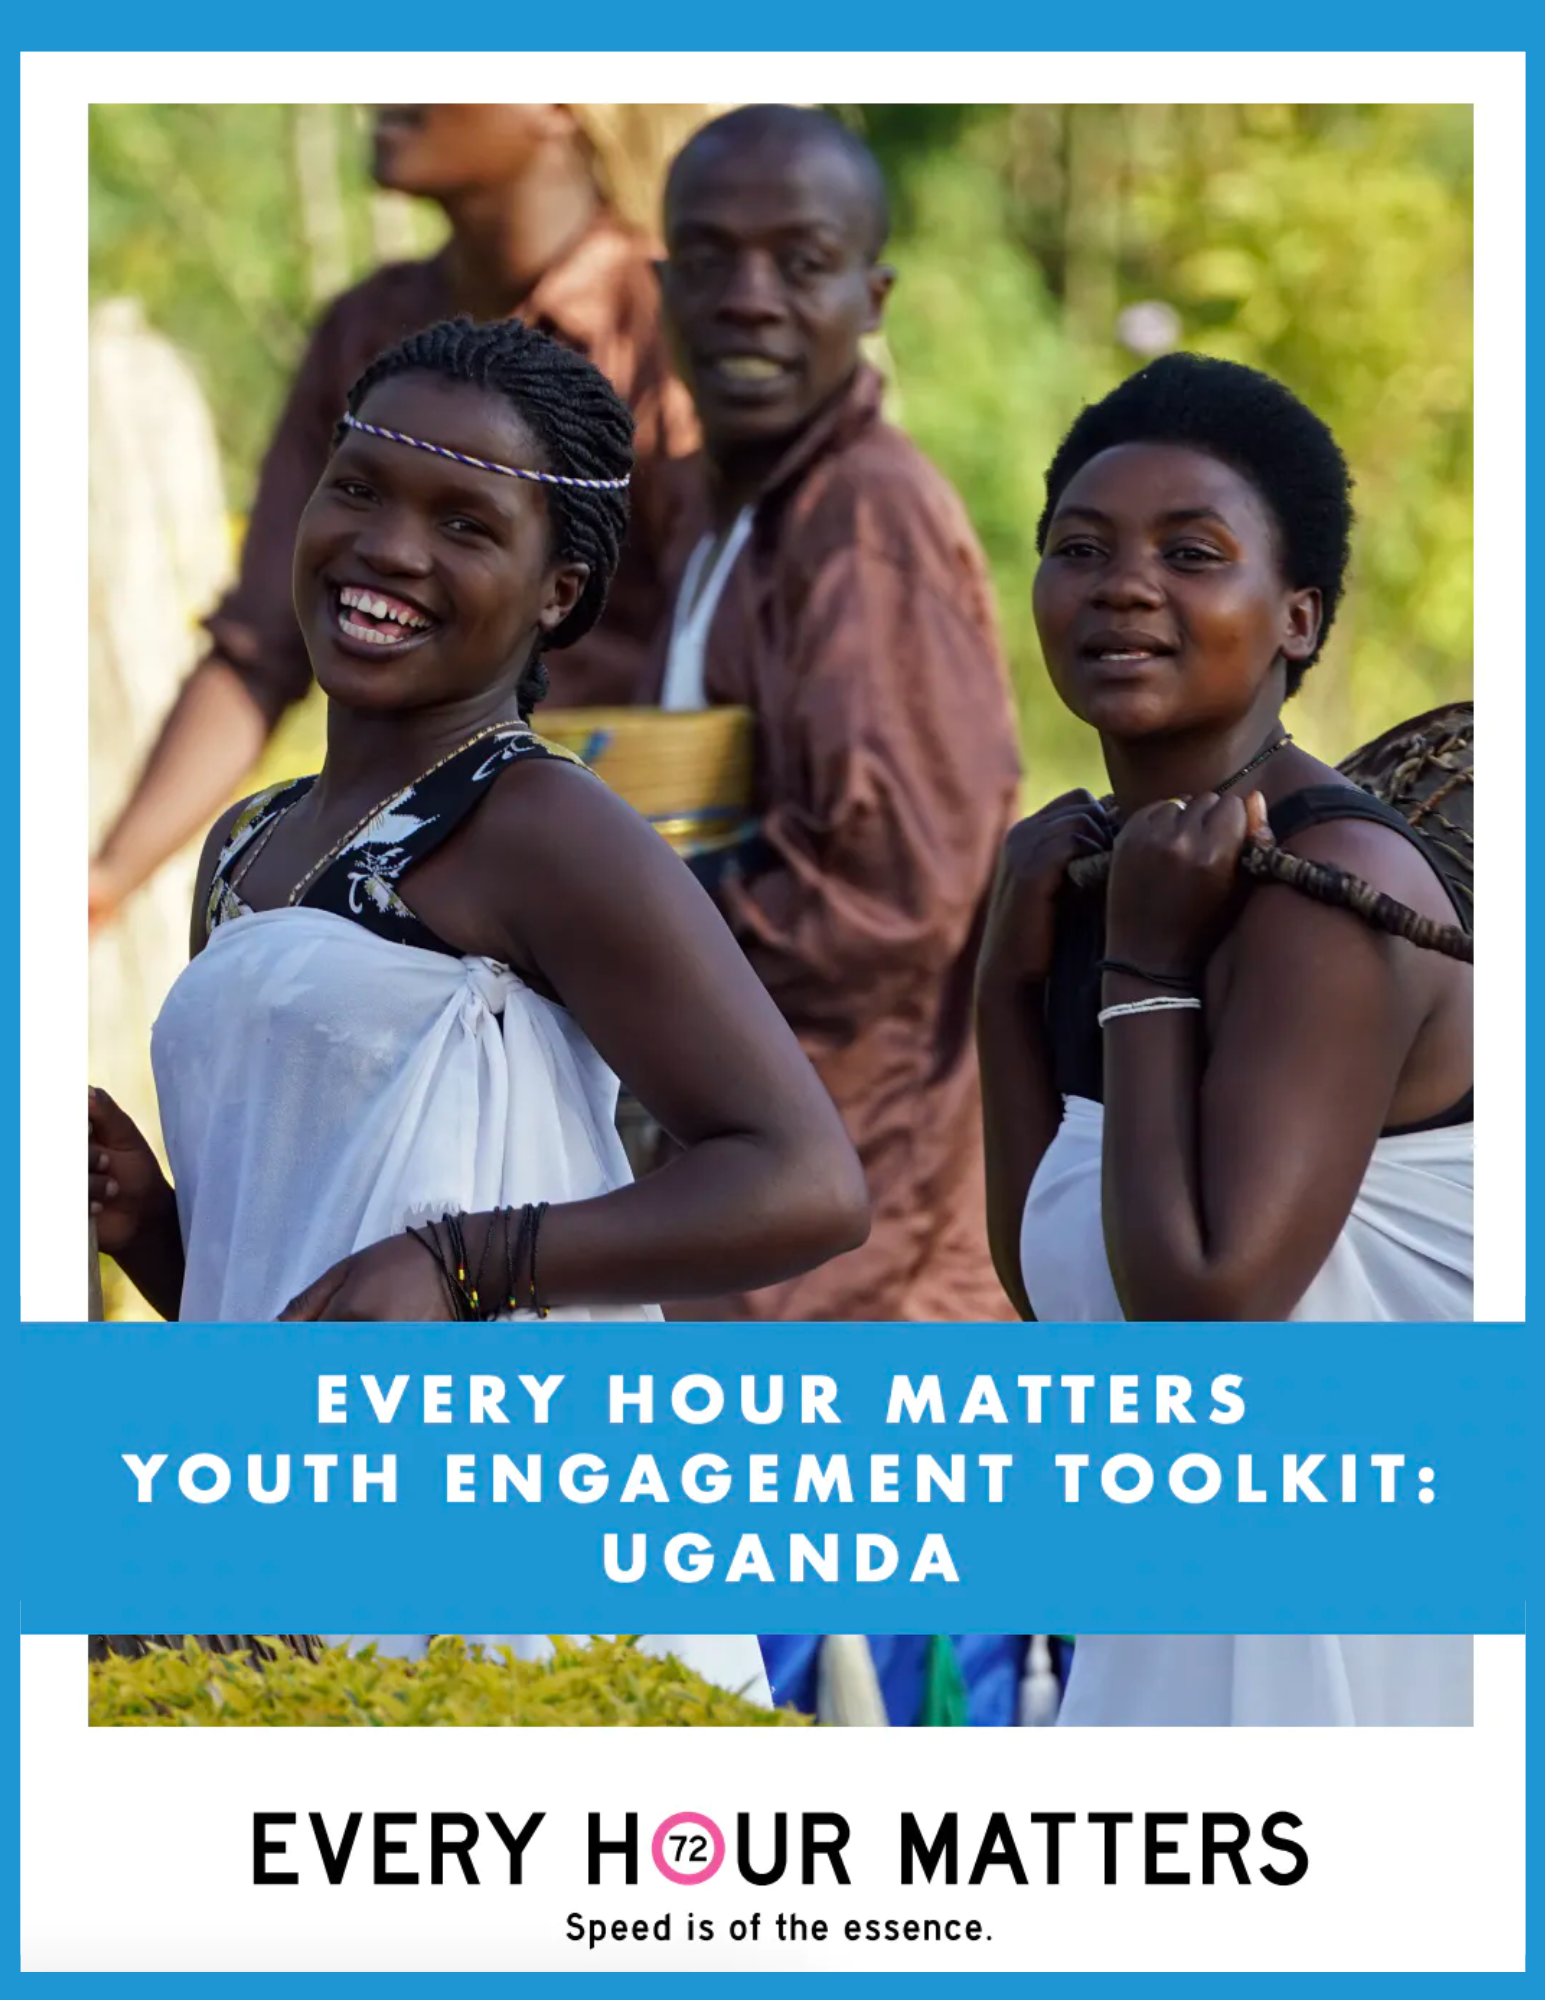 Every hour matters youth engagement toolkit Uganda